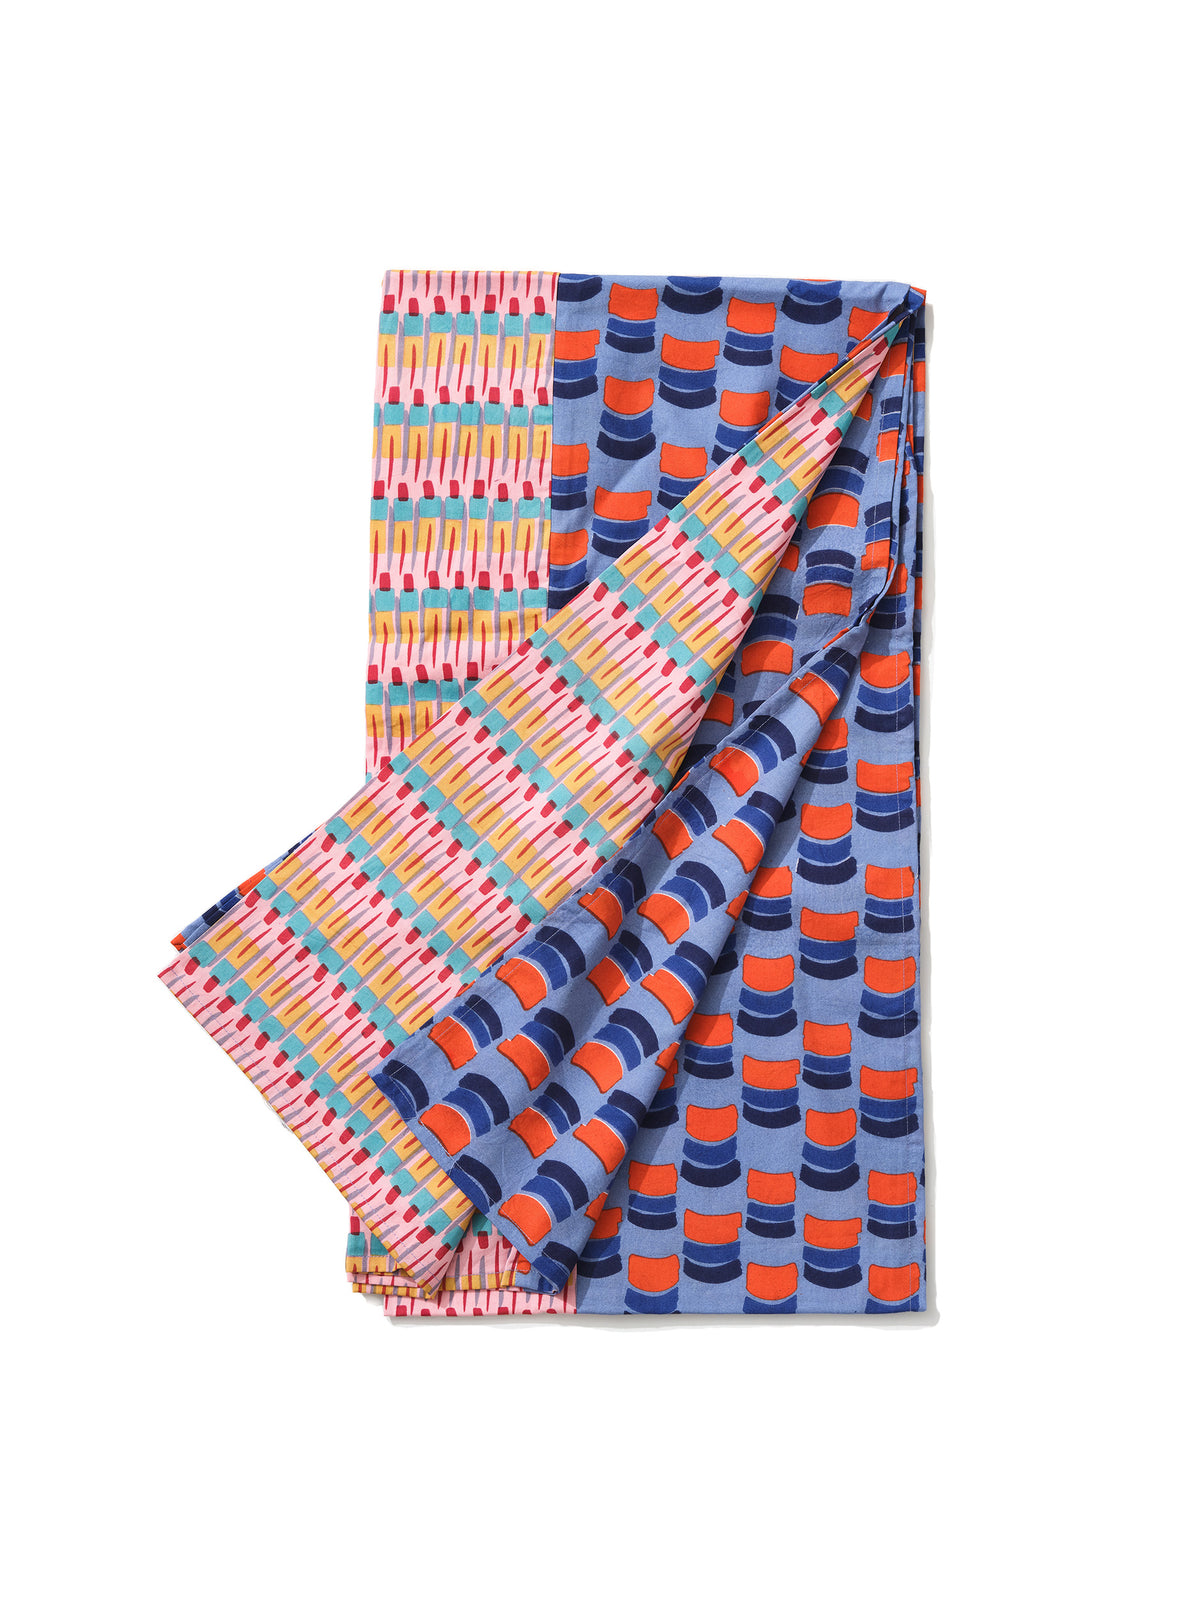 Patchwork Tablecloth in 'Blue Slice' & 'Row of Soldiers'